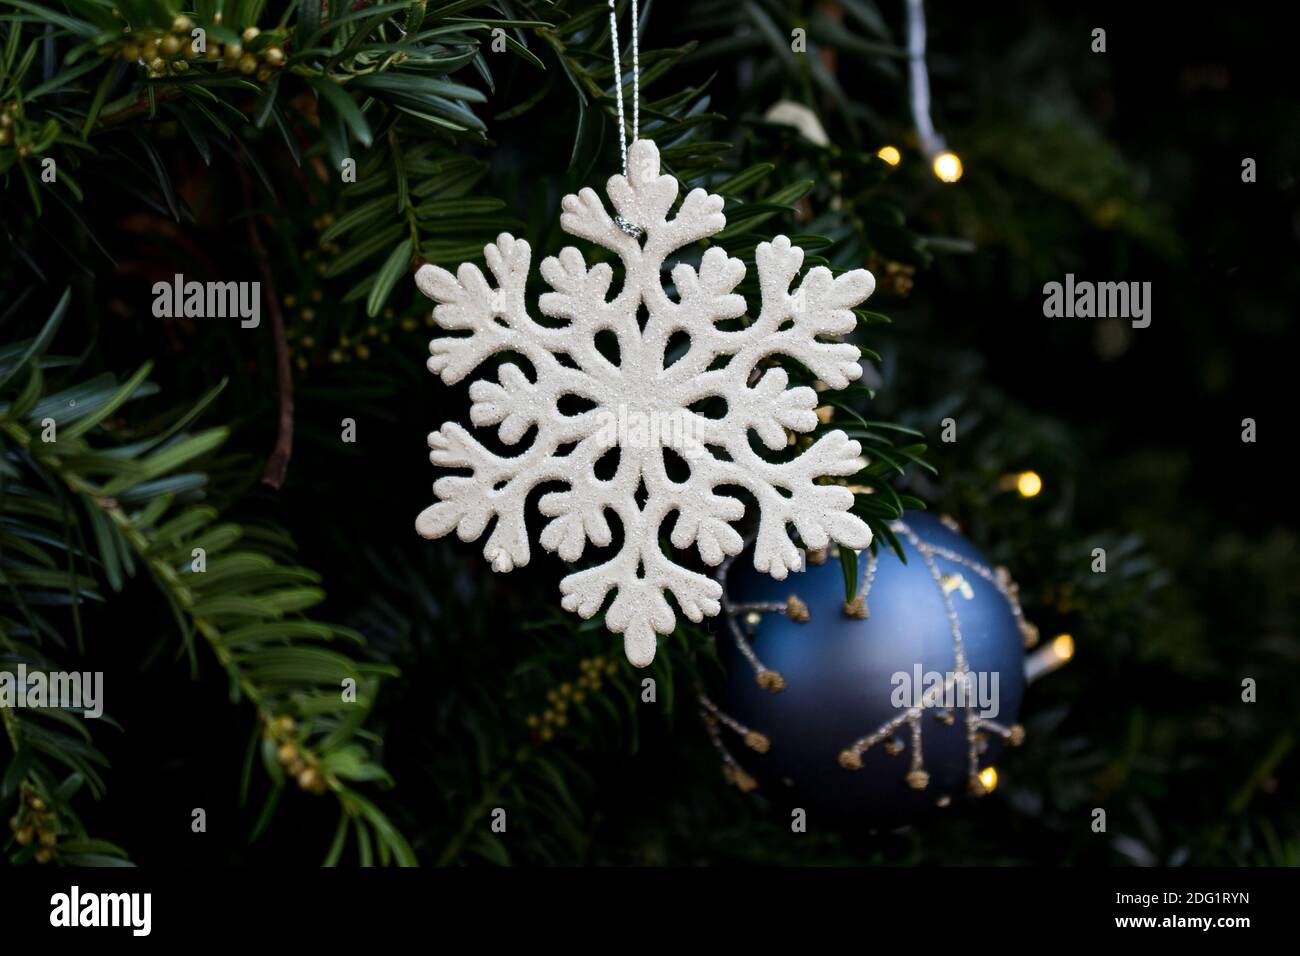 snowflake ornament and christmas tree ball hanging outside in yew tree Stock Photo